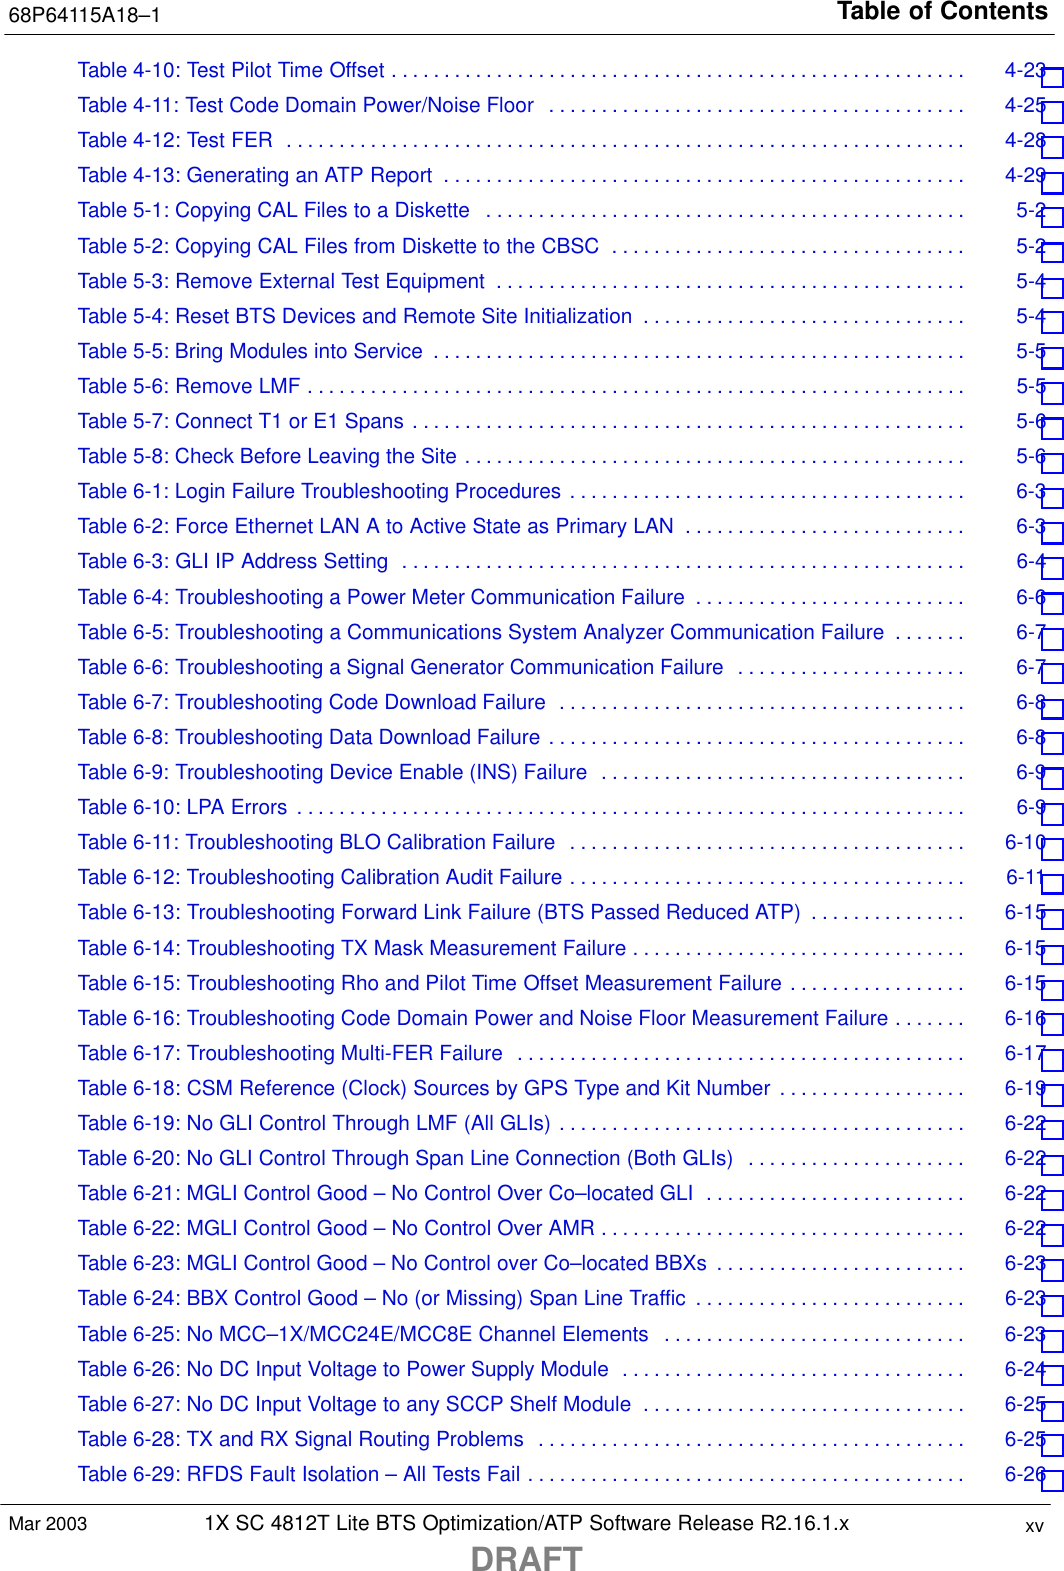 Table of Contents68P64115A18–11X SC 4812T Lite BTS Optimization/ATP Software Release R2.16.1.xDRAFTxvMar 2003Table 4-10: Test Pilot Time Offset 4-23 . . . . . . . . . . . . . . . . . . . . . . . . . . . . . . . . . . . . . . . . . . . . . . . . . . . . . . . Table 4-11: Test Code Domain Power/Noise Floor 4-25 . . . . . . . . . . . . . . . . . . . . . . . . . . . . . . . . . . . . . . . . Table 4-12: Test FER 4-28 . . . . . . . . . . . . . . . . . . . . . . . . . . . . . . . . . . . . . . . . . . . . . . . . . . . . . . . . . . . . . . . . . Table 4-13: Generating an ATP Report 4-29 . . . . . . . . . . . . . . . . . . . . . . . . . . . . . . . . . . . . . . . . . . . . . . . . . . Table 5-1: Copying CAL Files to a Diskette 5-2 . . . . . . . . . . . . . . . . . . . . . . . . . . . . . . . . . . . . . . . . . . . . . . Table 5-2: Copying CAL Files from Diskette to the CBSC 5-2 . . . . . . . . . . . . . . . . . . . . . . . . . . . . . . . . . . Table 5-3: Remove External Test Equipment 5-4 . . . . . . . . . . . . . . . . . . . . . . . . . . . . . . . . . . . . . . . . . . . . . Table 5-4: Reset BTS Devices and Remote Site Initialization 5-4 . . . . . . . . . . . . . . . . . . . . . . . . . . . . . . . Table 5-5: Bring Modules into Service 5-5 . . . . . . . . . . . . . . . . . . . . . . . . . . . . . . . . . . . . . . . . . . . . . . . . . . . Table 5-6: Remove LMF 5-5 . . . . . . . . . . . . . . . . . . . . . . . . . . . . . . . . . . . . . . . . . . . . . . . . . . . . . . . . . . . . . . . Table 5-7: Connect T1 or E1 Spans 5-6 . . . . . . . . . . . . . . . . . . . . . . . . . . . . . . . . . . . . . . . . . . . . . . . . . . . . . Table 5-8: Check Before Leaving the Site 5-6 . . . . . . . . . . . . . . . . . . . . . . . . . . . . . . . . . . . . . . . . . . . . . . . . Table 6-1: Login Failure Troubleshooting Procedures 6-3 . . . . . . . . . . . . . . . . . . . . . . . . . . . . . . . . . . . . . . Table 6-2: Force Ethernet LAN A to Active State as Primary LAN 6-3 . . . . . . . . . . . . . . . . . . . . . . . . . . . Table 6-3: GLI IP Address Setting 6-4 . . . . . . . . . . . . . . . . . . . . . . . . . . . . . . . . . . . . . . . . . . . . . . . . . . . . . . Table 6-4: Troubleshooting a Power Meter Communication Failure 6-6 . . . . . . . . . . . . . . . . . . . . . . . . . . Table 6-5: Troubleshooting a Communications System Analyzer Communication Failure 6-7 . . . . . . . Table 6-6: Troubleshooting a Signal Generator Communication Failure 6-7 . . . . . . . . . . . . . . . . . . . . . . Table 6-7: Troubleshooting Code Download Failure 6-8 . . . . . . . . . . . . . . . . . . . . . . . . . . . . . . . . . . . . . . . Table 6-8: Troubleshooting Data Download Failure 6-8 . . . . . . . . . . . . . . . . . . . . . . . . . . . . . . . . . . . . . . . . Table 6-9: Troubleshooting Device Enable (INS) Failure 6-9 . . . . . . . . . . . . . . . . . . . . . . . . . . . . . . . . . . . Table 6-10: LPA Errors 6-9 . . . . . . . . . . . . . . . . . . . . . . . . . . . . . . . . . . . . . . . . . . . . . . . . . . . . . . . . . . . . . . . . Table 6-11: Troubleshooting BLO Calibration Failure 6-10 . . . . . . . . . . . . . . . . . . . . . . . . . . . . . . . . . . . . . . Table 6-12: Troubleshooting Calibration Audit Failure 6-11 . . . . . . . . . . . . . . . . . . . . . . . . . . . . . . . . . . . . . . Table 6-13: Troubleshooting Forward Link Failure (BTS Passed Reduced ATP) 6-15 . . . . . . . . . . . . . . . Table 6-14: Troubleshooting TX Mask Measurement Failure 6-15 . . . . . . . . . . . . . . . . . . . . . . . . . . . . . . . . Table 6-15: Troubleshooting Rho and Pilot Time Offset Measurement Failure 6-15 . . . . . . . . . . . . . . . . . Table 6-16: Troubleshooting Code Domain Power and Noise Floor Measurement Failure 6-16 . . . . . . . Table 6-17: Troubleshooting Multi-FER Failure 6-17 . . . . . . . . . . . . . . . . . . . . . . . . . . . . . . . . . . . . . . . . . . . Table 6-18: CSM Reference (Clock) Sources by GPS Type and Kit Number 6-19 . . . . . . . . . . . . . . . . . . Table 6-19: No GLI Control Through LMF (All GLIs) 6-22 . . . . . . . . . . . . . . . . . . . . . . . . . . . . . . . . . . . . . . . Table 6-20: No GLI Control Through Span Line Connection (Both GLIs) 6-22 . . . . . . . . . . . . . . . . . . . . . Table 6-21: MGLI Control Good – No Control Over Co–located GLI 6-22 . . . . . . . . . . . . . . . . . . . . . . . . . Table 6-22: MGLI Control Good – No Control Over AMR 6-22 . . . . . . . . . . . . . . . . . . . . . . . . . . . . . . . . . . . Table 6-23: MGLI Control Good – No Control over Co–located BBXs 6-23 . . . . . . . . . . . . . . . . . . . . . . . . Table 6-24: BBX Control Good – No (or Missing) Span Line Traffic 6-23 . . . . . . . . . . . . . . . . . . . . . . . . . . Table 6-25: No MCC–1X/MCC24E/MCC8E Channel Elements 6-23 . . . . . . . . . . . . . . . . . . . . . . . . . . . . . Table 6-26: No DC Input Voltage to Power Supply Module 6-24 . . . . . . . . . . . . . . . . . . . . . . . . . . . . . . . . . Table 6-27: No DC Input Voltage to any SCCP Shelf Module 6-25 . . . . . . . . . . . . . . . . . . . . . . . . . . . . . . . Table 6-28: TX and RX Signal Routing Problems 6-25 . . . . . . . . . . . . . . . . . . . . . . . . . . . . . . . . . . . . . . . . . Table 6-29: RFDS Fault Isolation – All Tests Fail 6-26 . . . . . . . . . . . . . . . . . . . . . . . . . . . . . . . . . . . . . . . . . . 